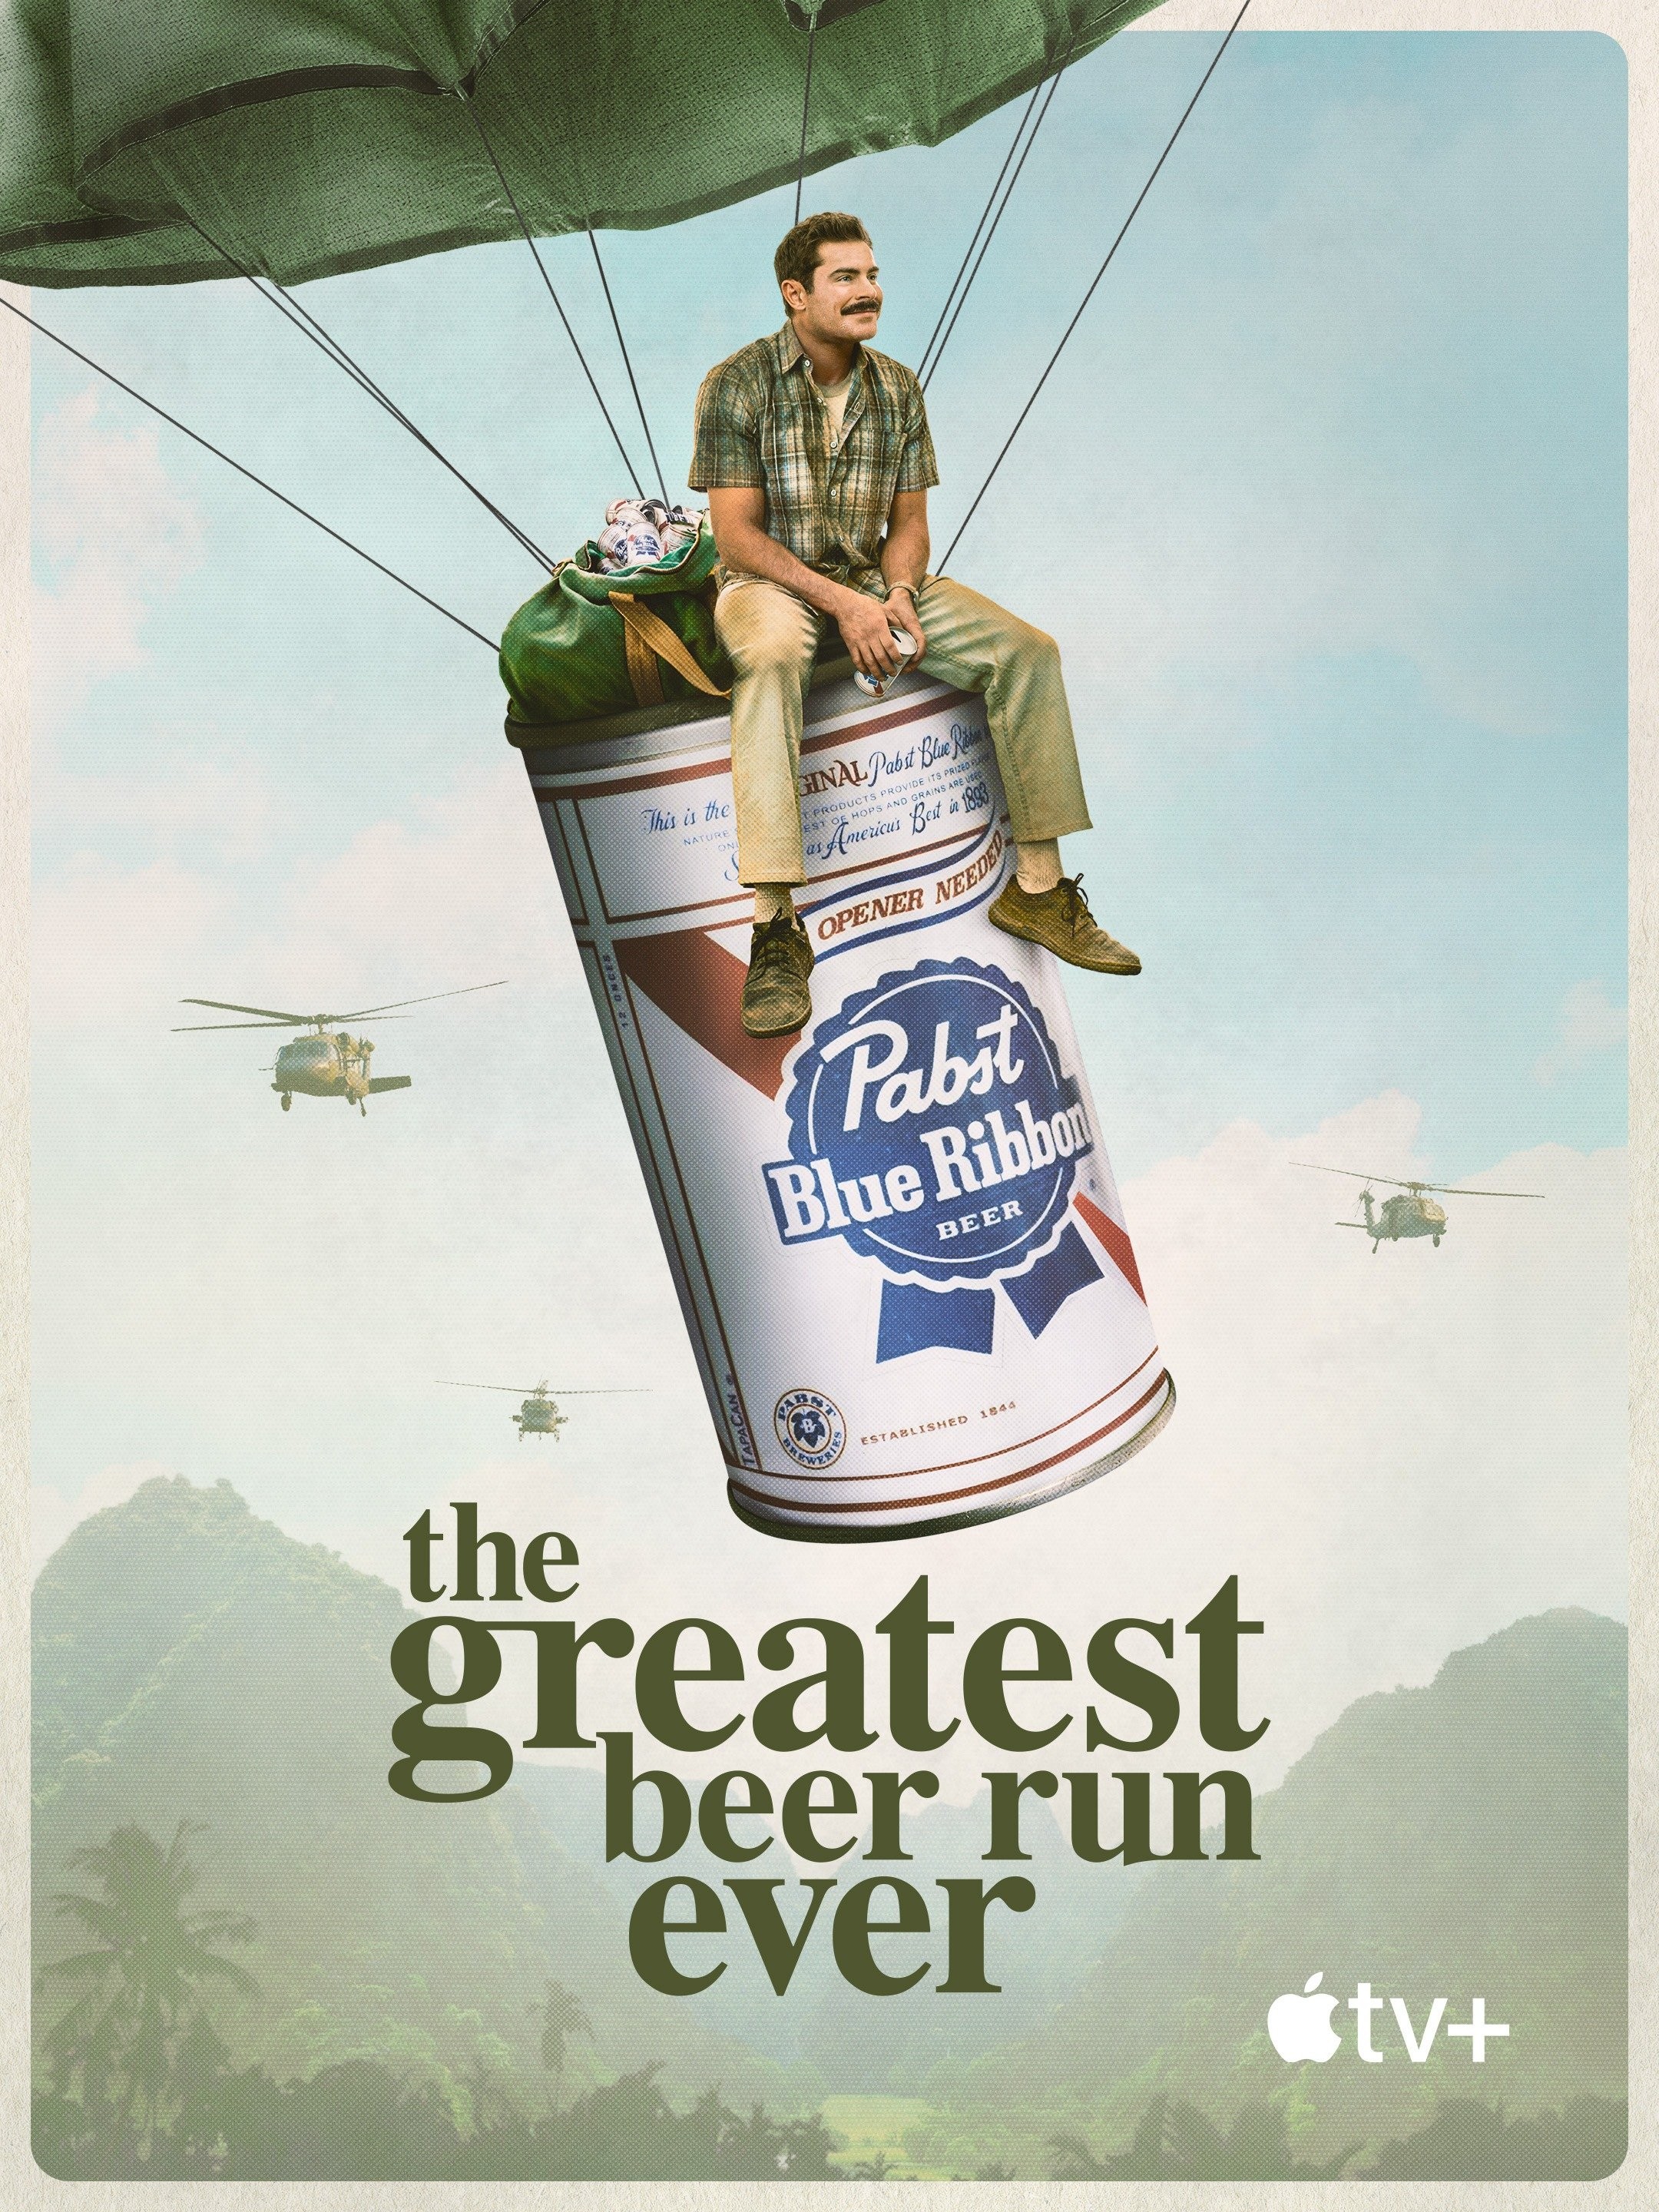 The True Story Behind 'The Greatest Beer Run Ever' - The New York Times